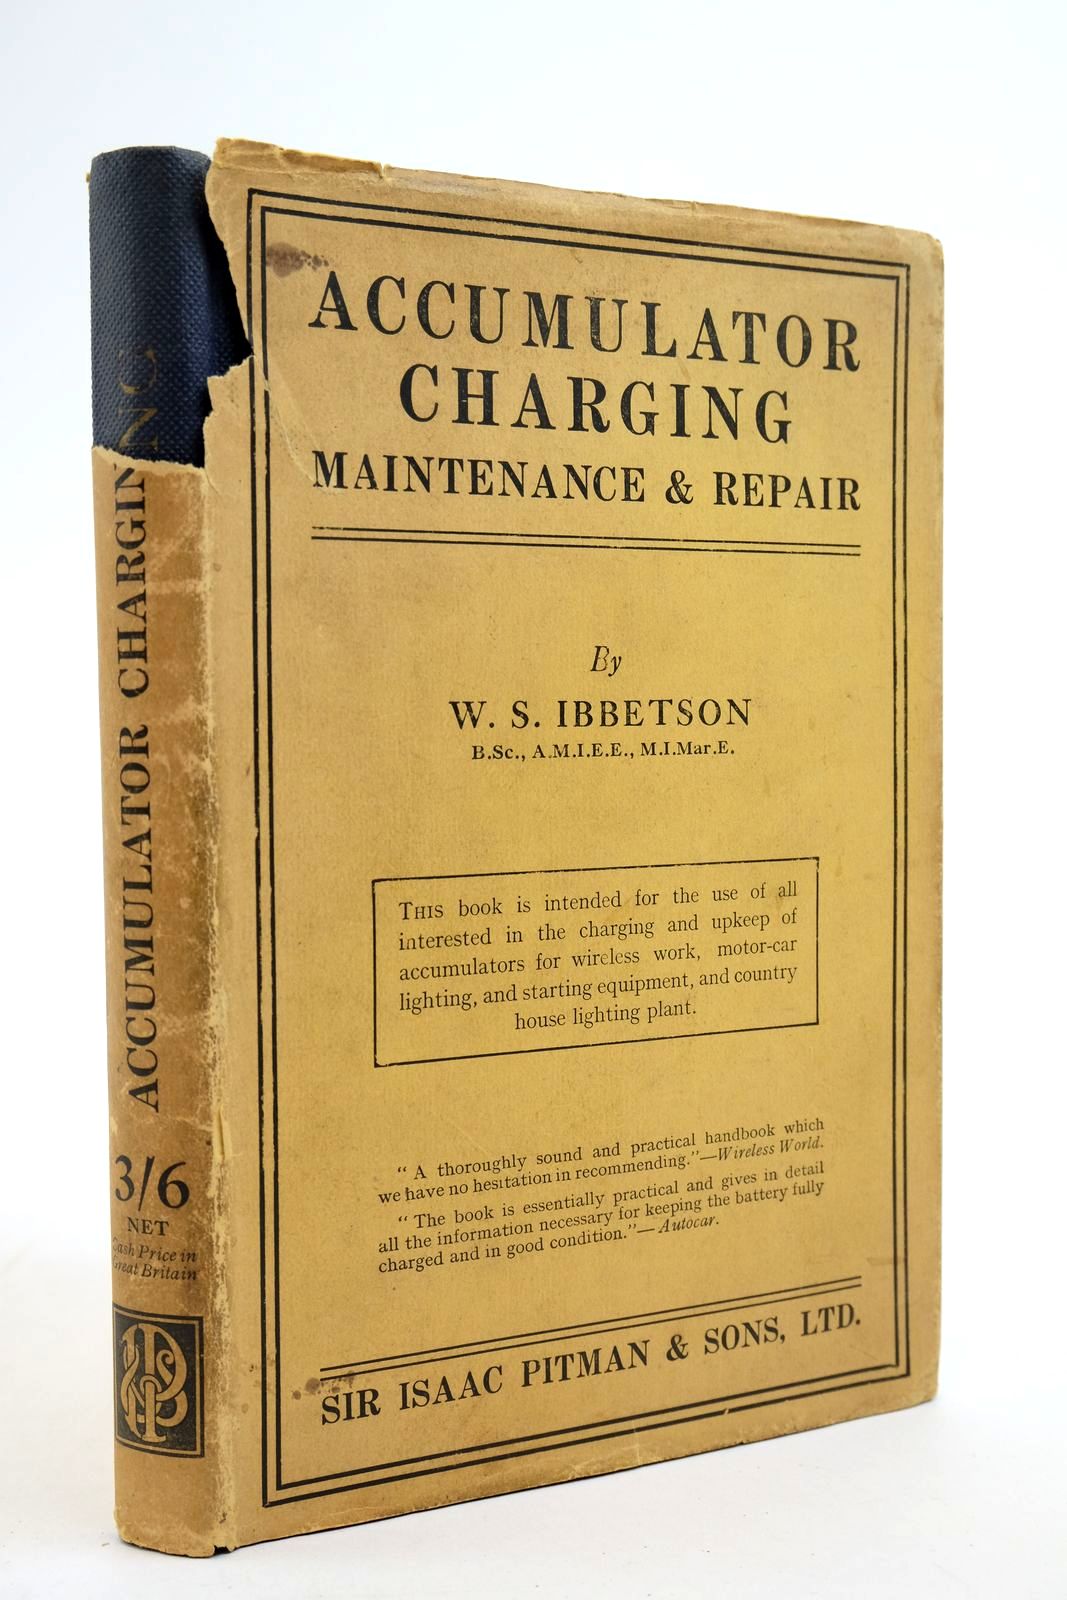 Photo of ACCUMULATOR CHARGING MAINTENANCE AND REPAIR written by Ibbetson, W.S. published by Sir Isaac Pitman & Sons Ltd. (STOCK CODE: 2139067)  for sale by Stella & Rose's Books